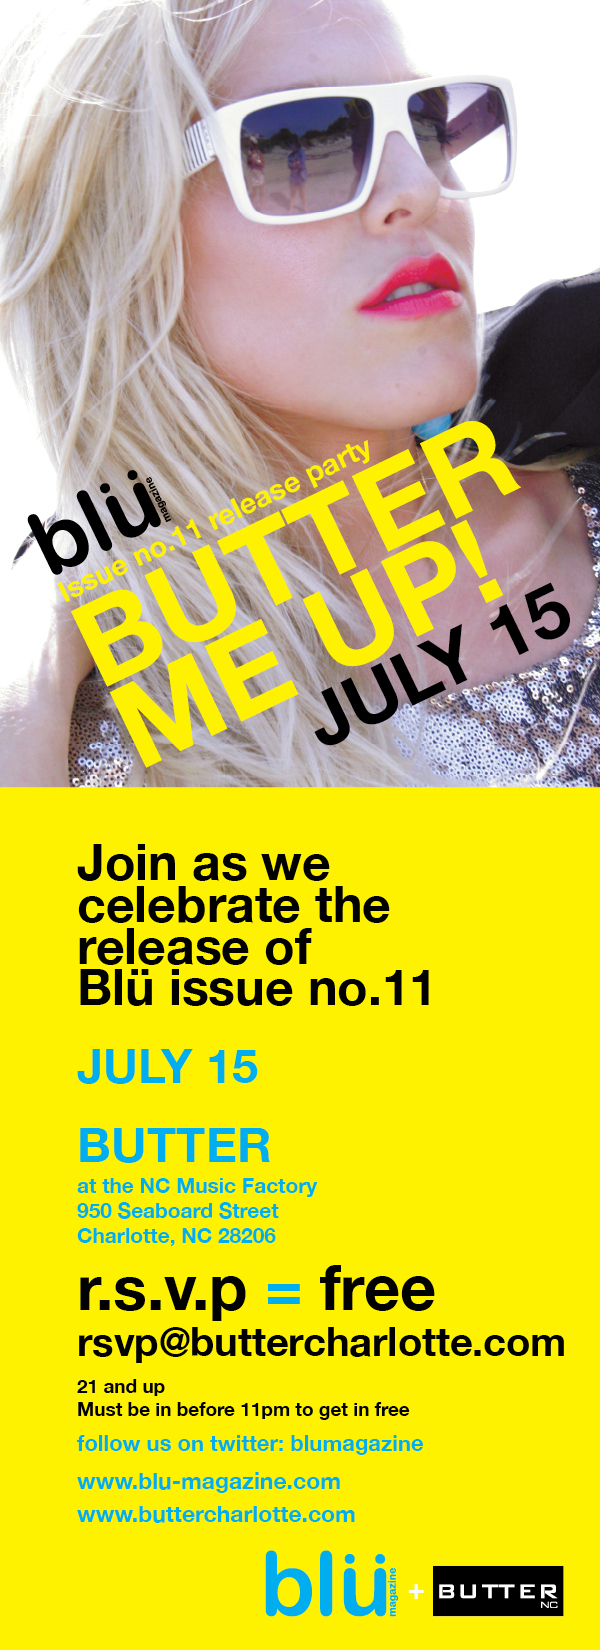 Blu Magazine Issue Party July 15th